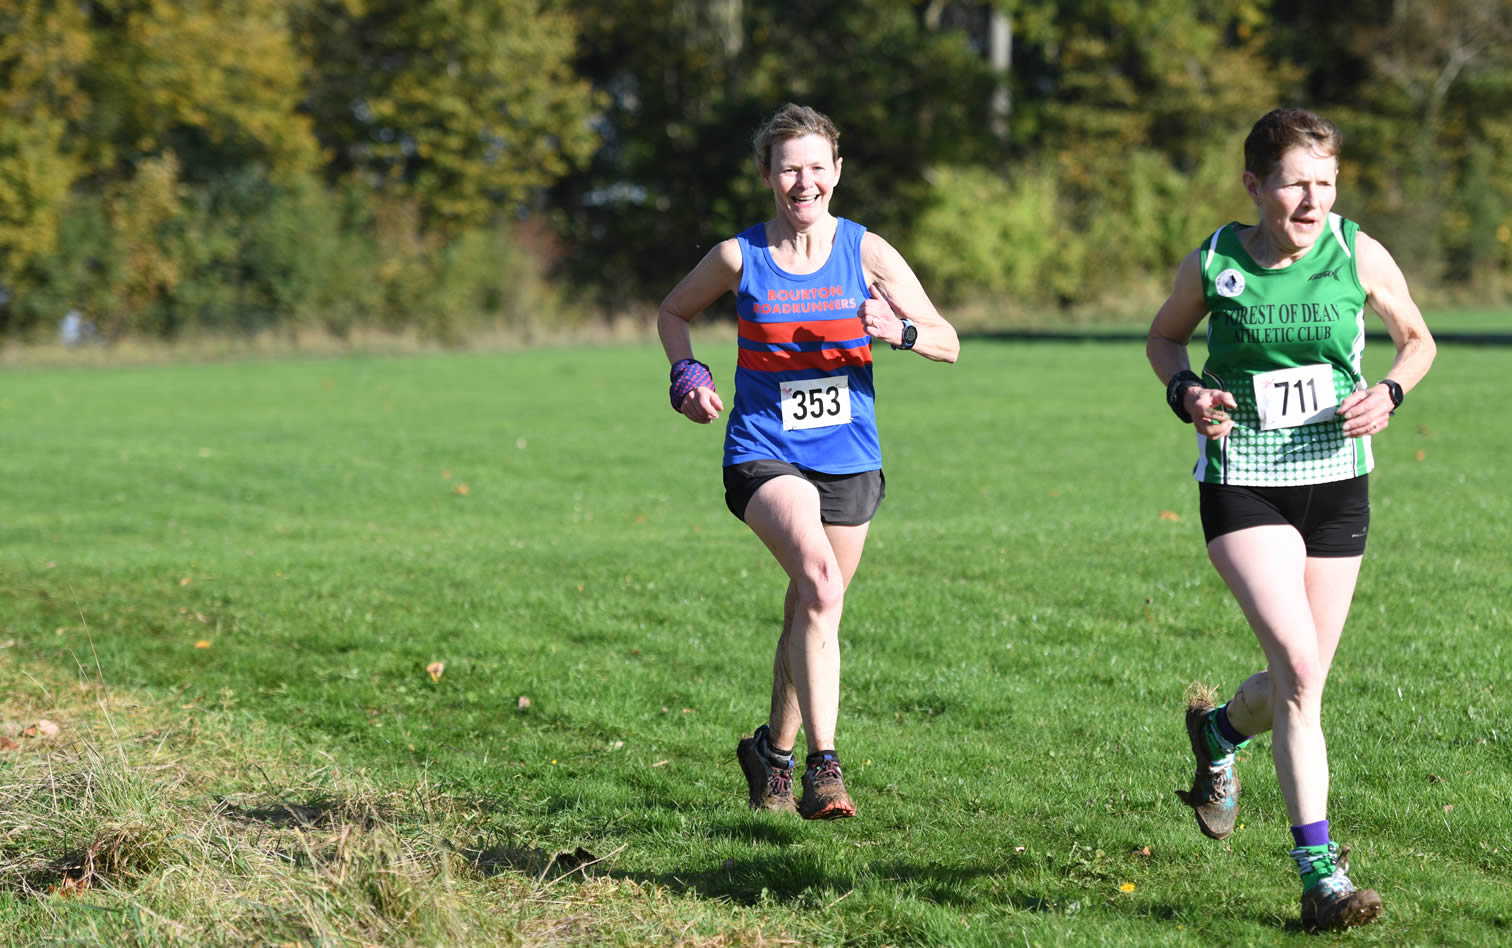 Susan Hunt at Gloucestershire AAA Cross Country League, Cirencester Park - 30th October 2021